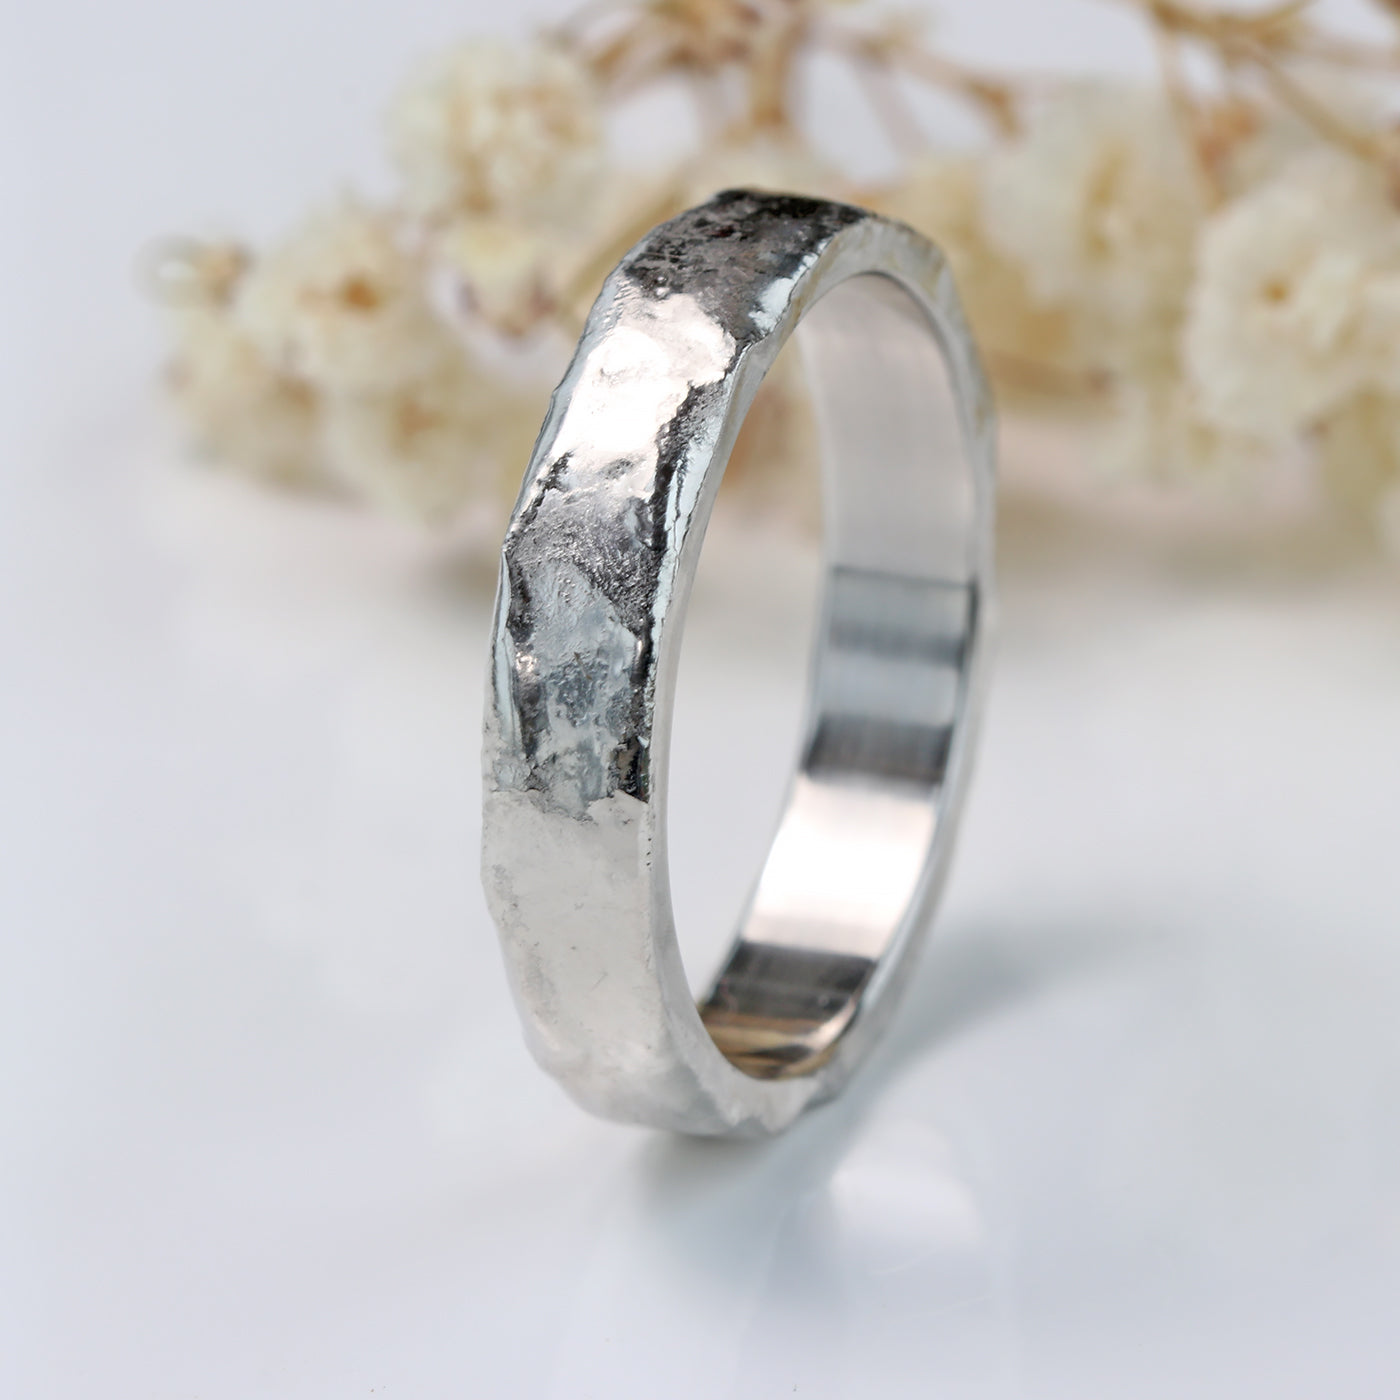 4mm Mineral Wedding Ring in 950 Platinum – Size P (resize up to G to P 1/2)